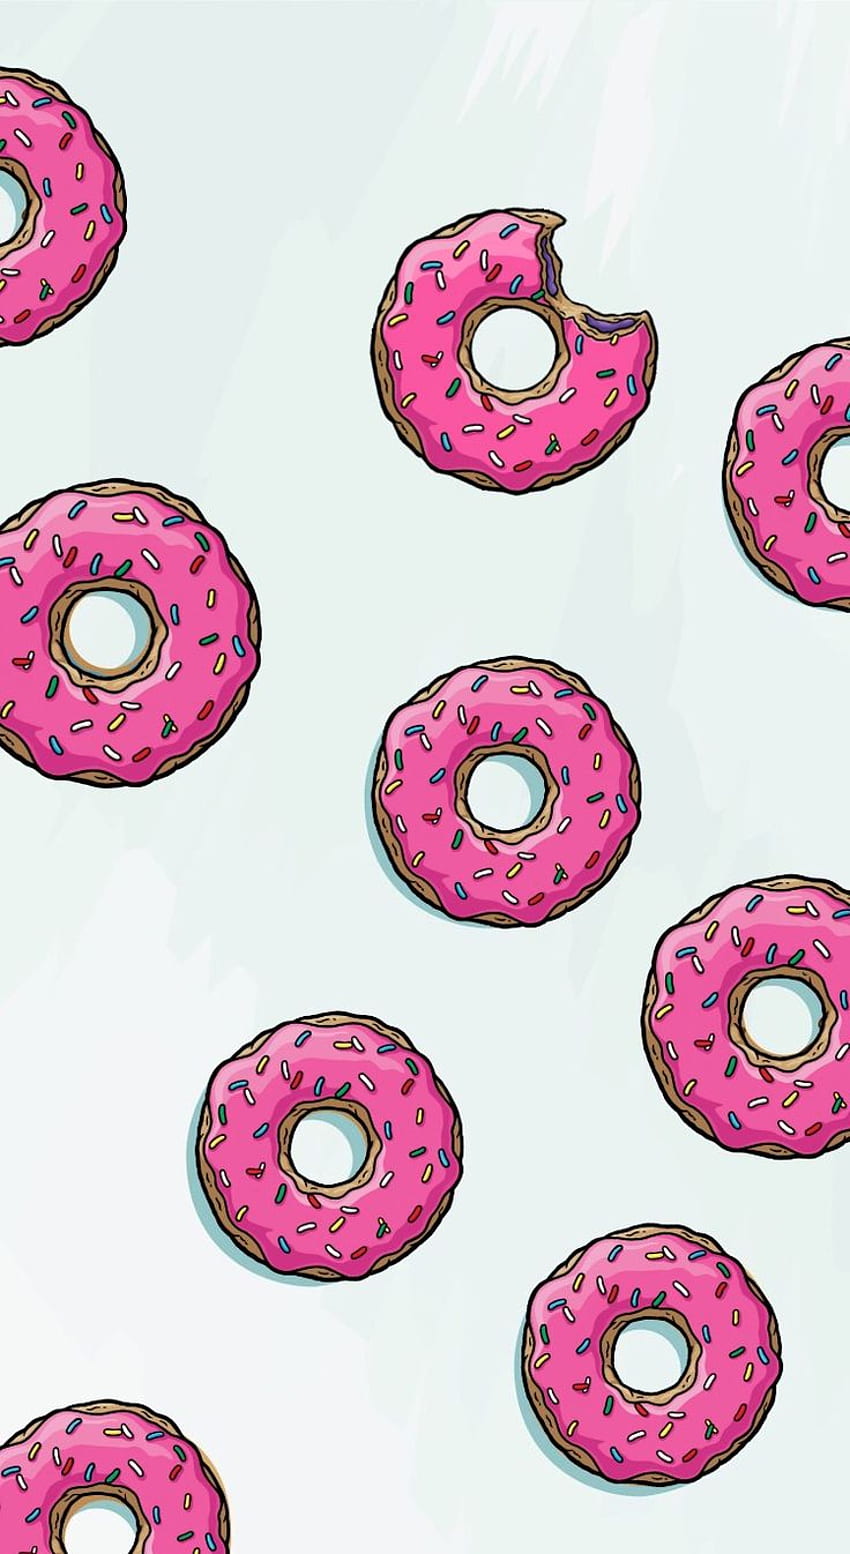 Cute Donuts iPhone - Donuts Background - - teahub.io, Aesthetic Donut HD phone wallpaper